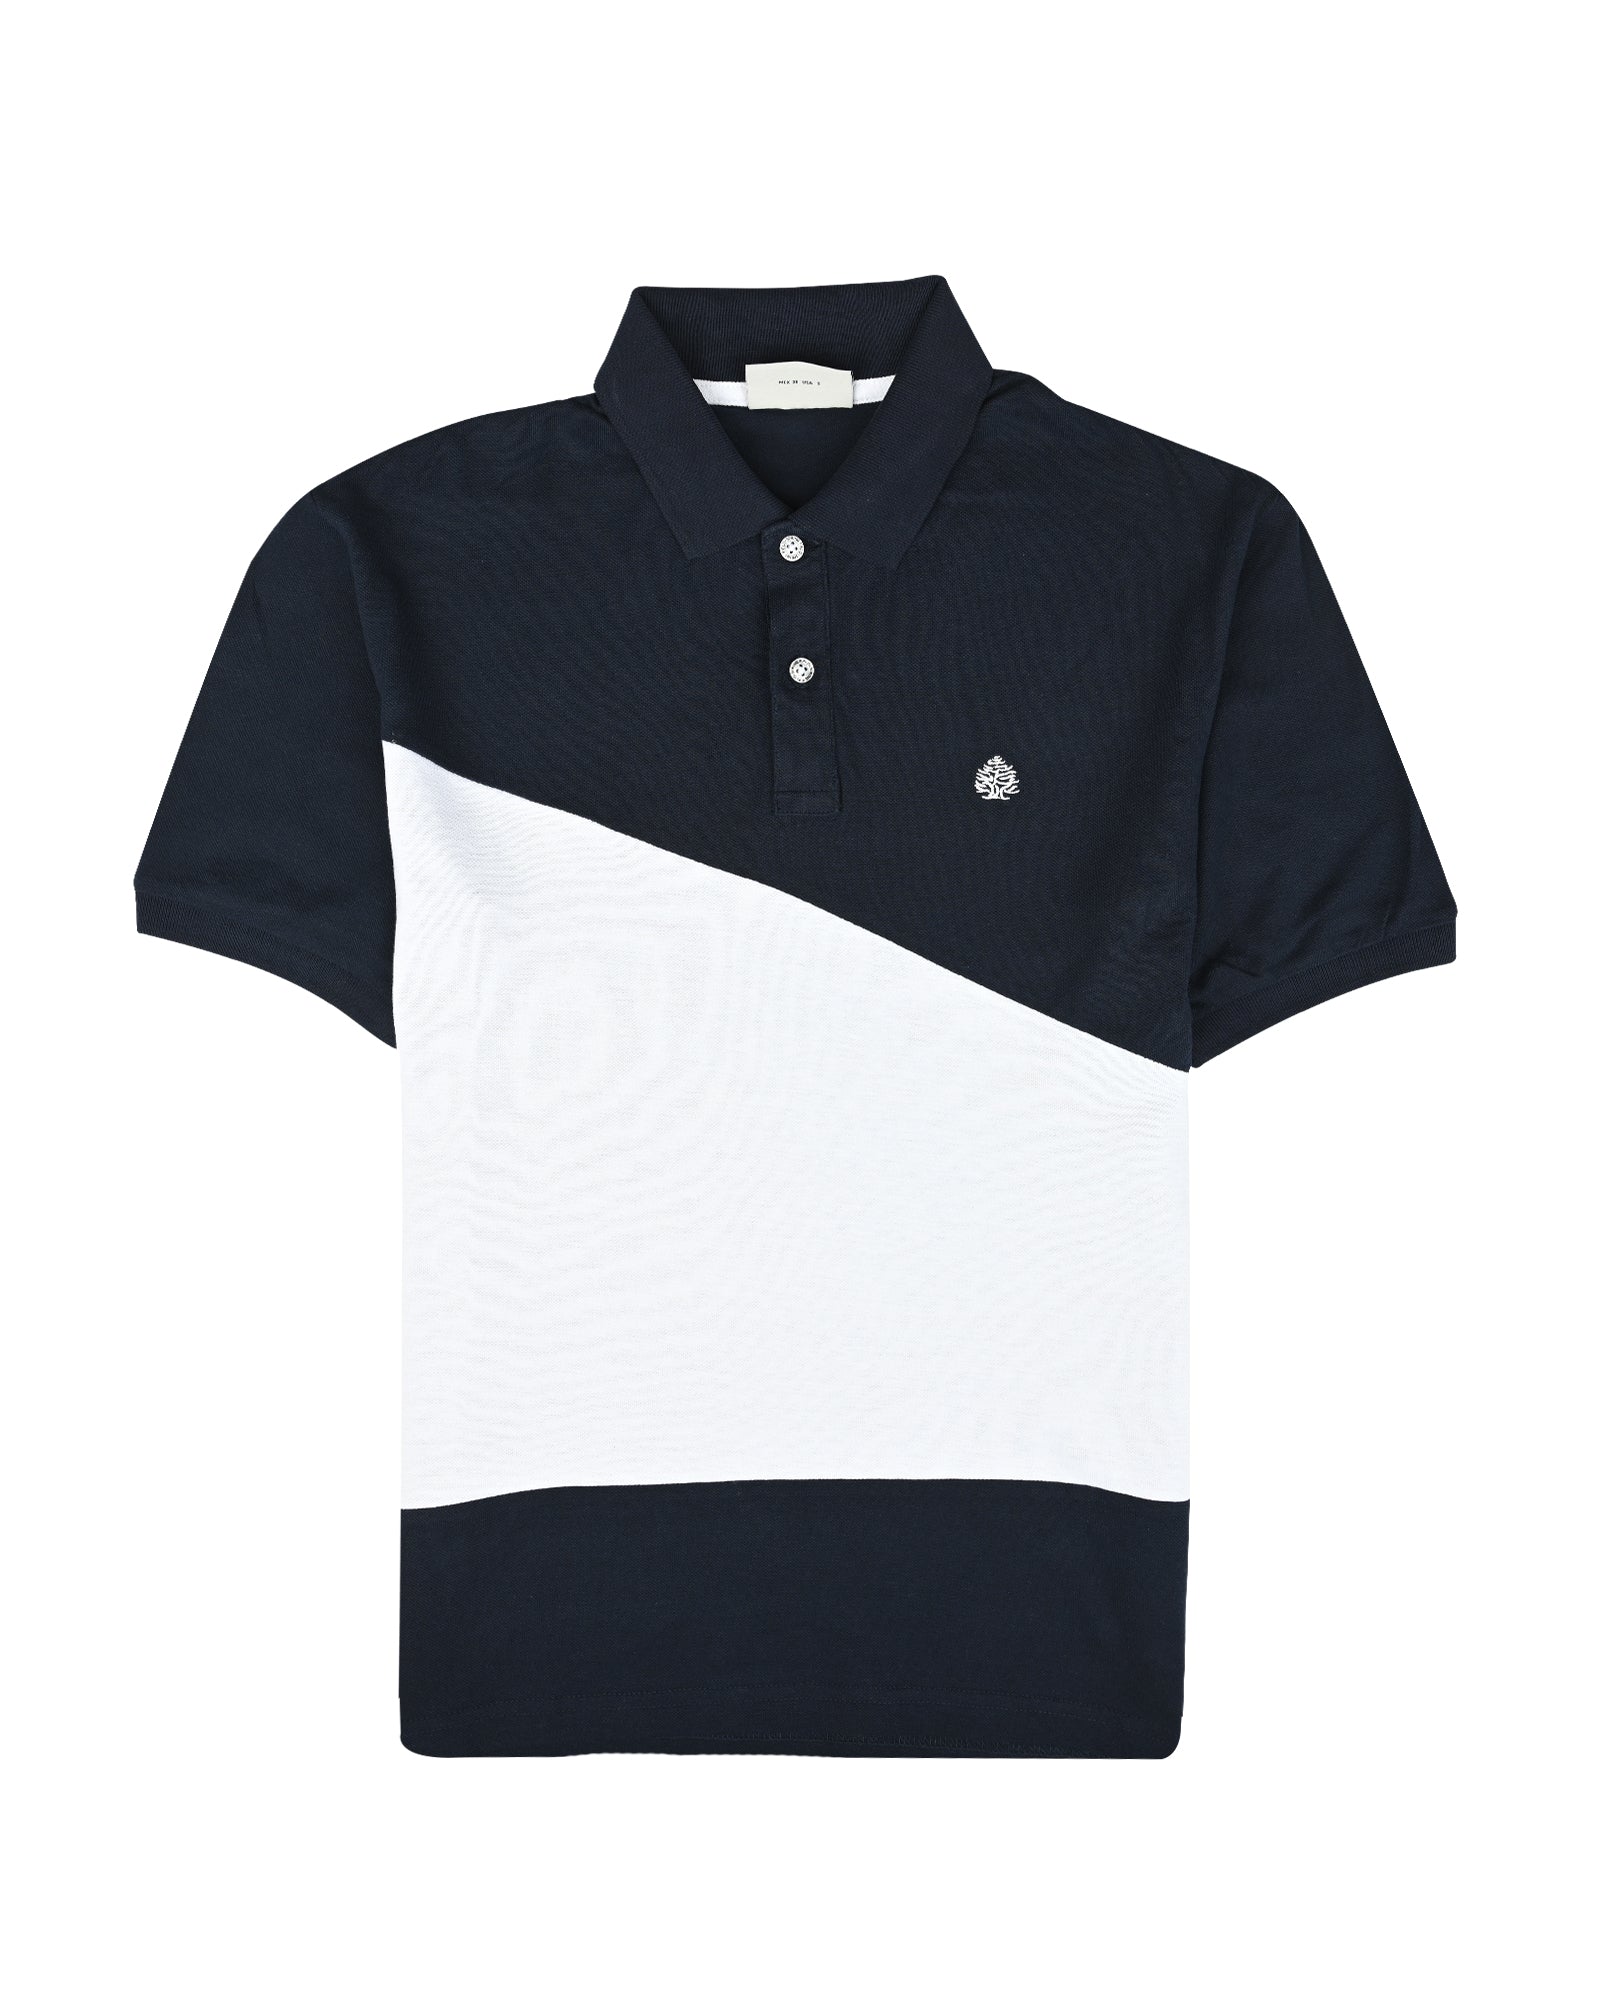 Men's Two Shades Polo Half Sleeve Slim Fit T-Shirt